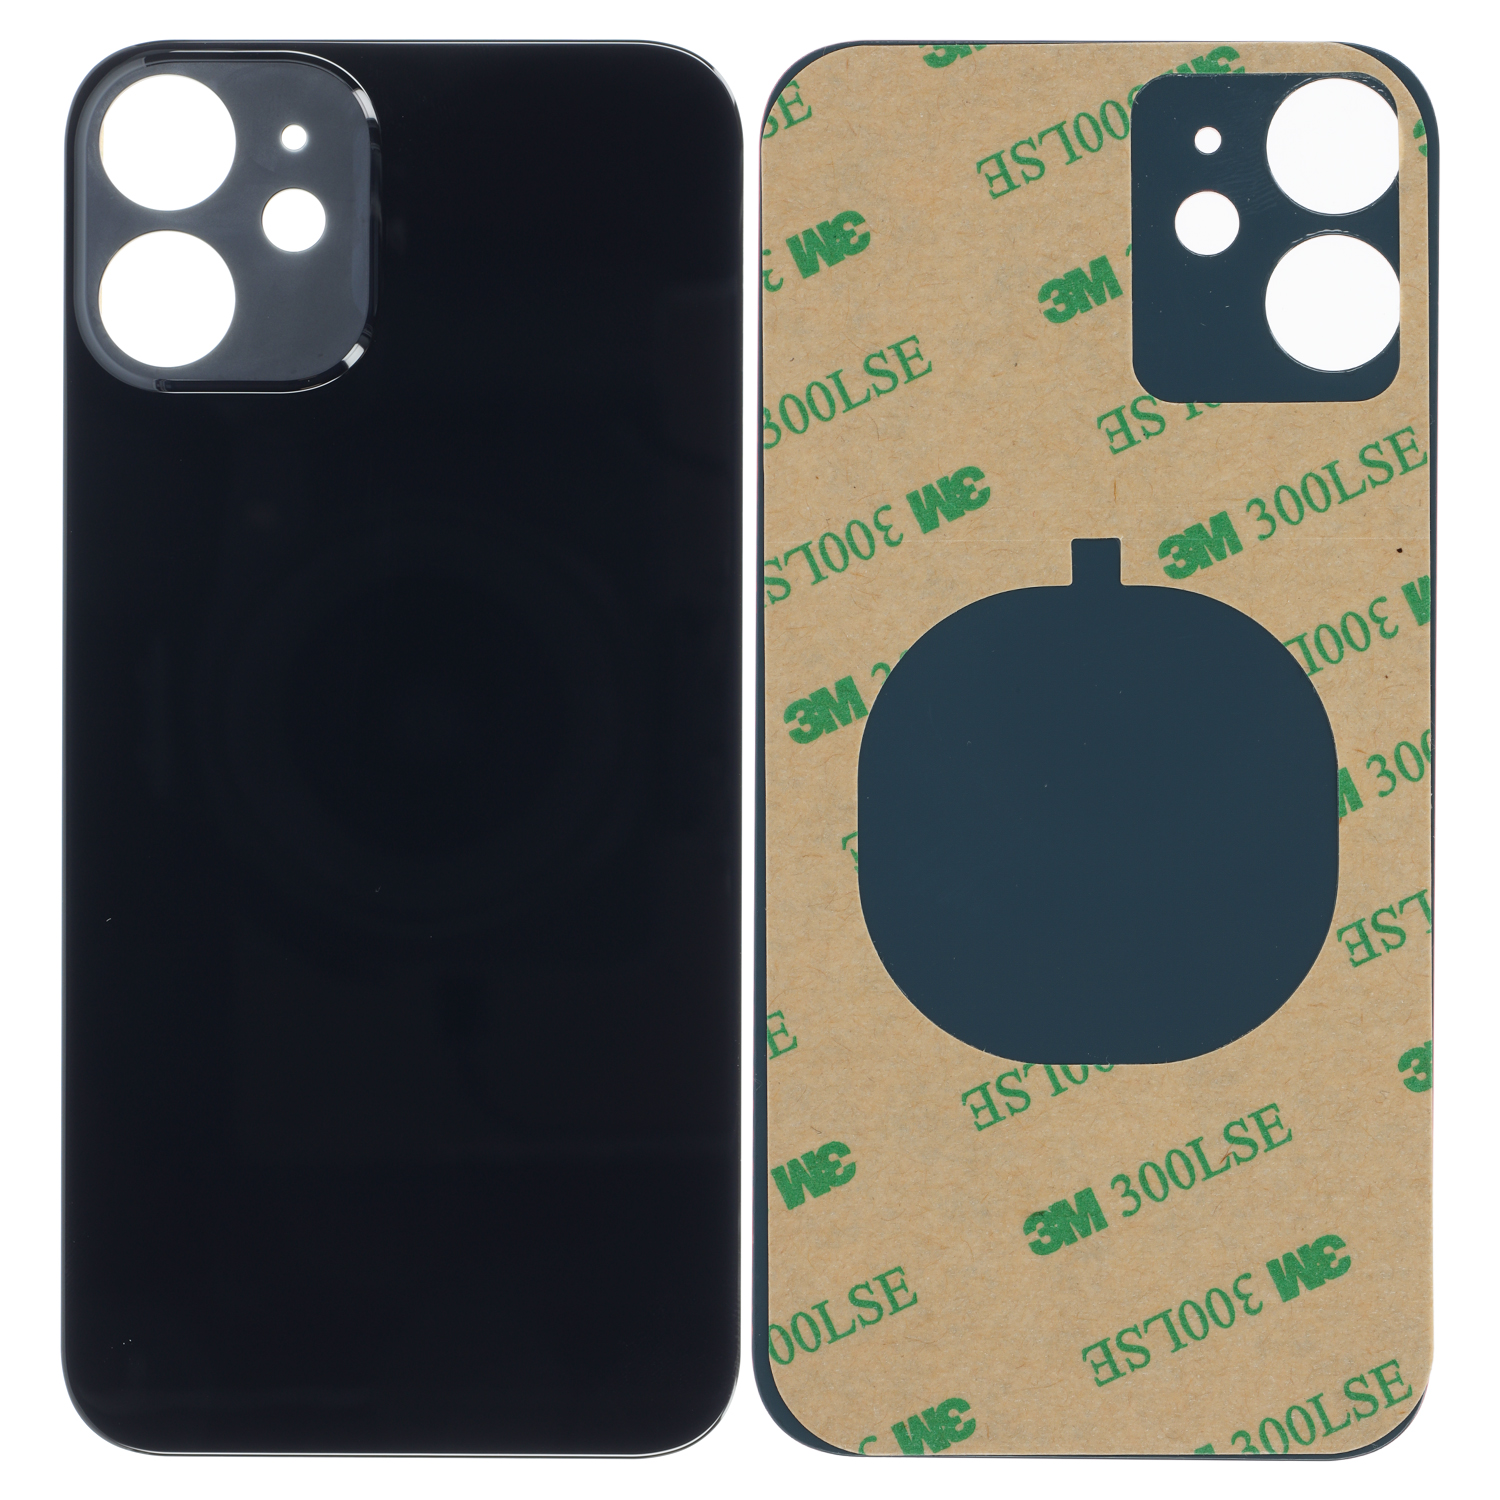 Glas Back Cover, Compatible with iPhone 12 Mini (A2399) Black ( without Logo )